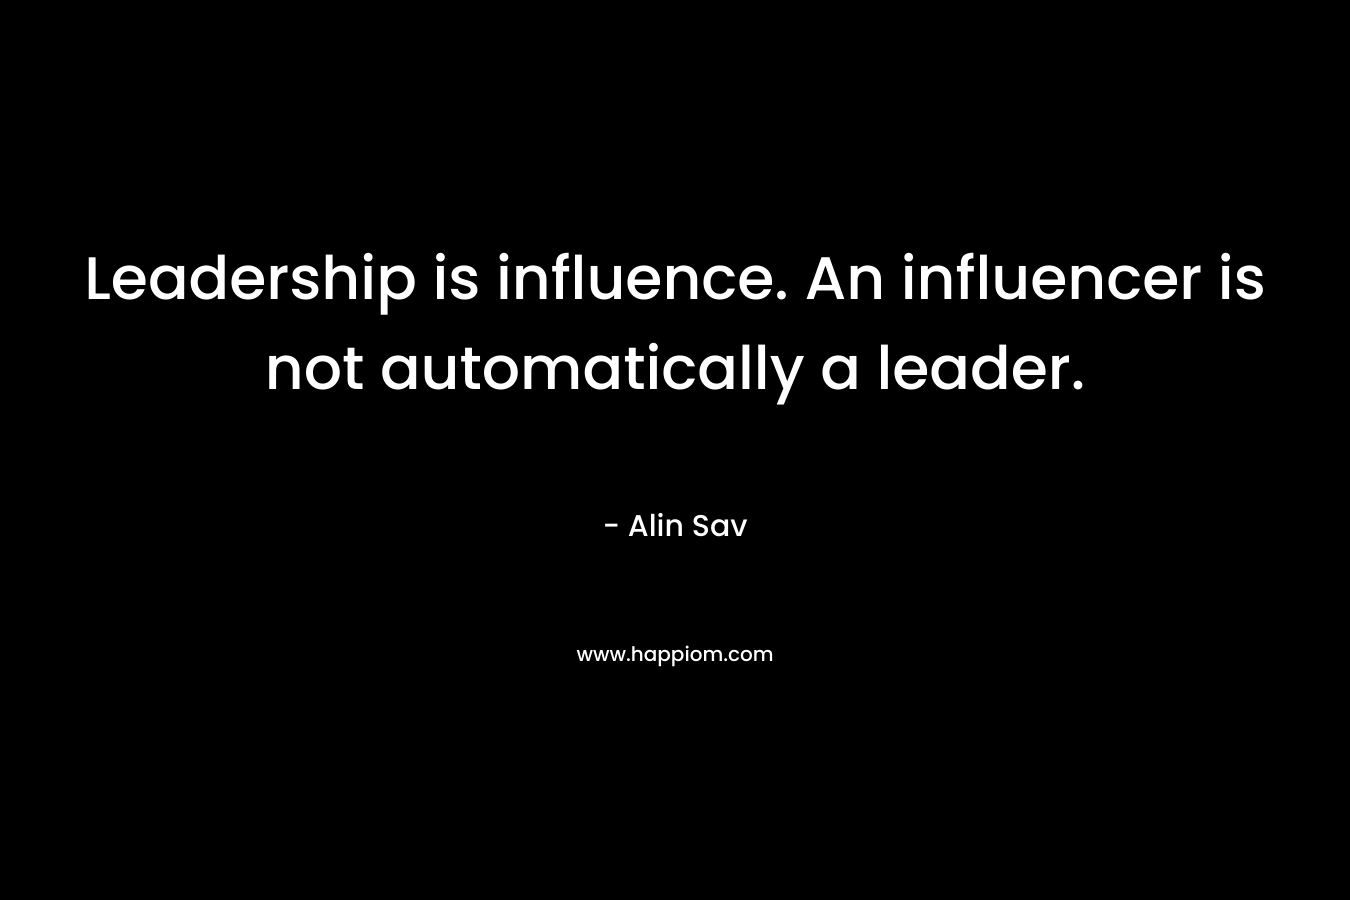 Leadership is influence. An influencer is not automatically a leader.